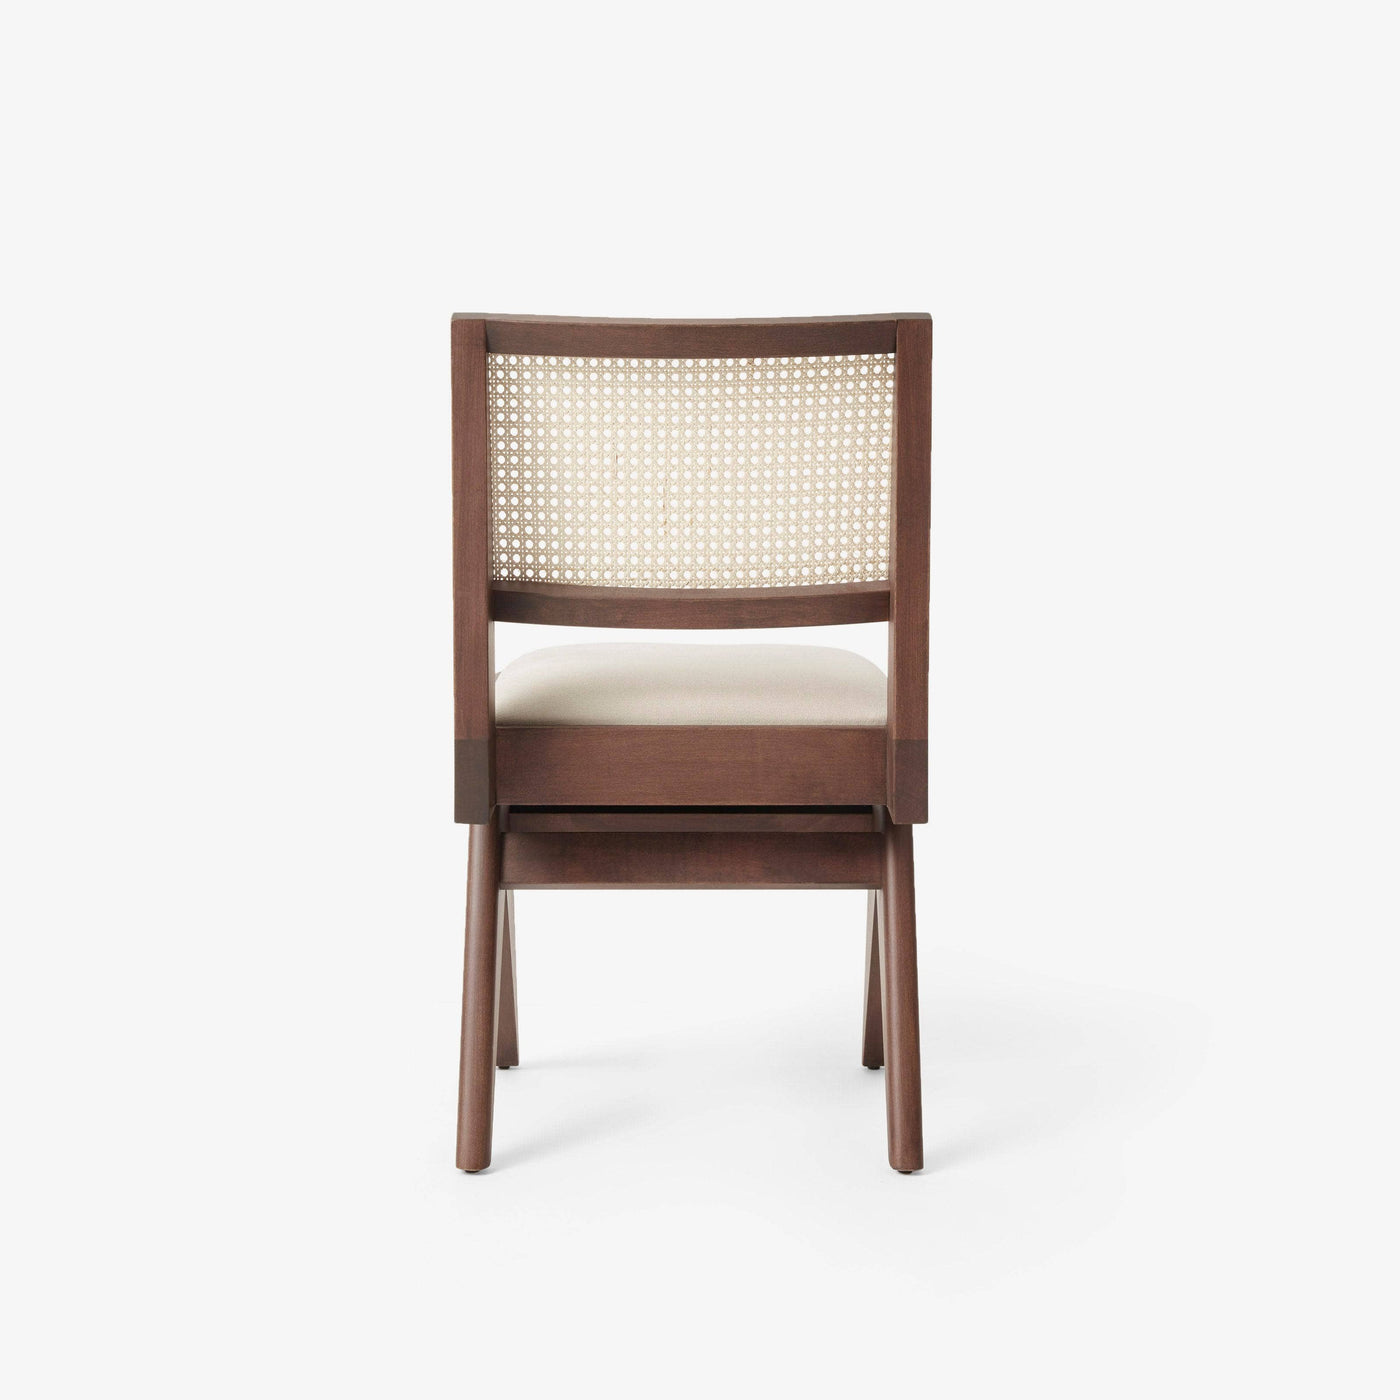 Cape Chair, Walnut - Cream Dining Chairs & Benches sazy.com